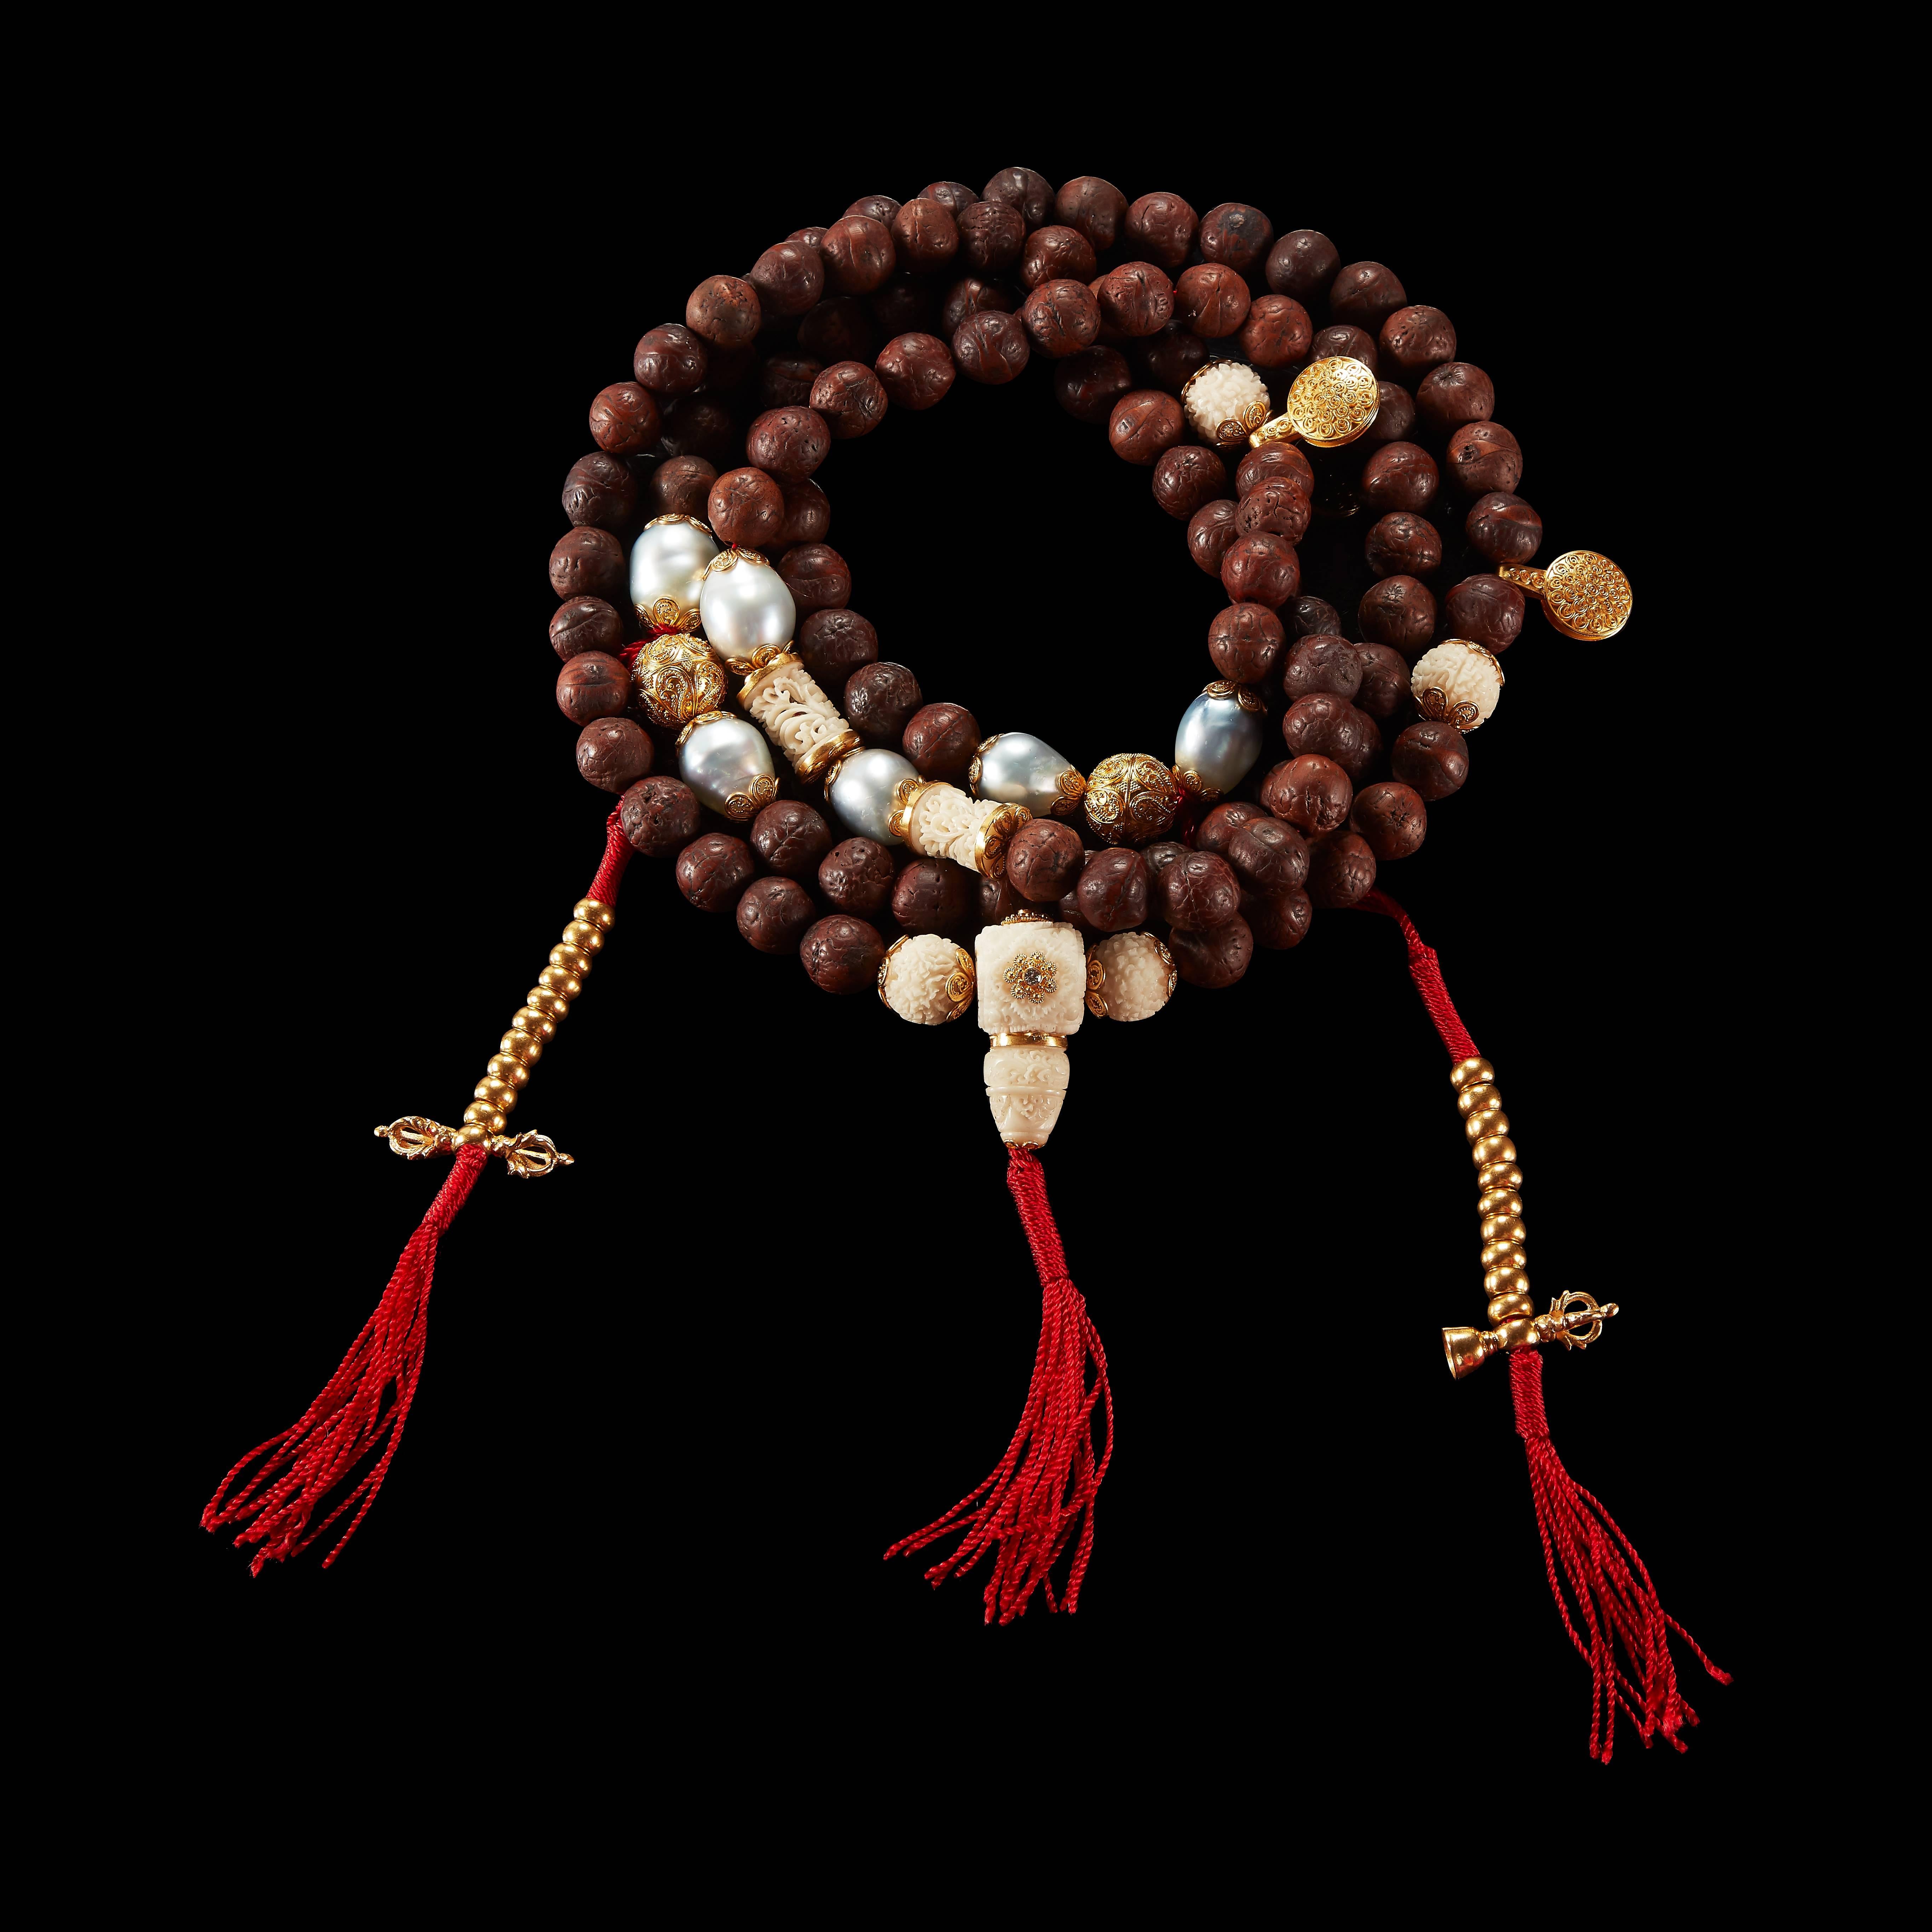 *Please contact us for more information on this piece or on creating your own Alexandra Mor custom Design.

This Alexandra Mor Tibetan-style Mala necklace features 108 Buddhist prayer beads, including ninety-four Bodhi beads, twenty yellow gold